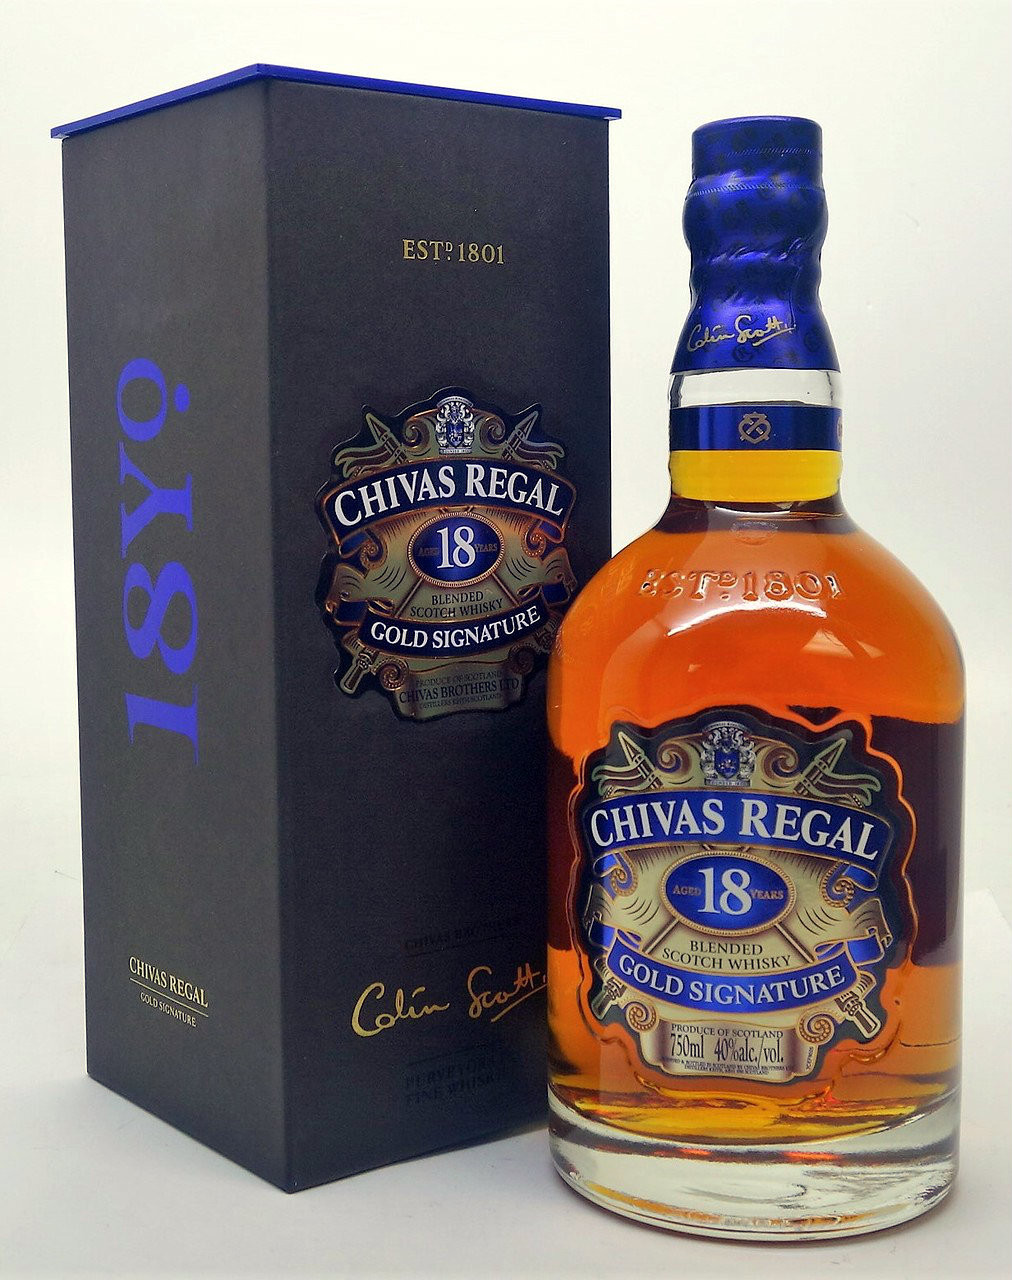 Chivas Regal 18 Years - Blended Scotch Whisky, Gold